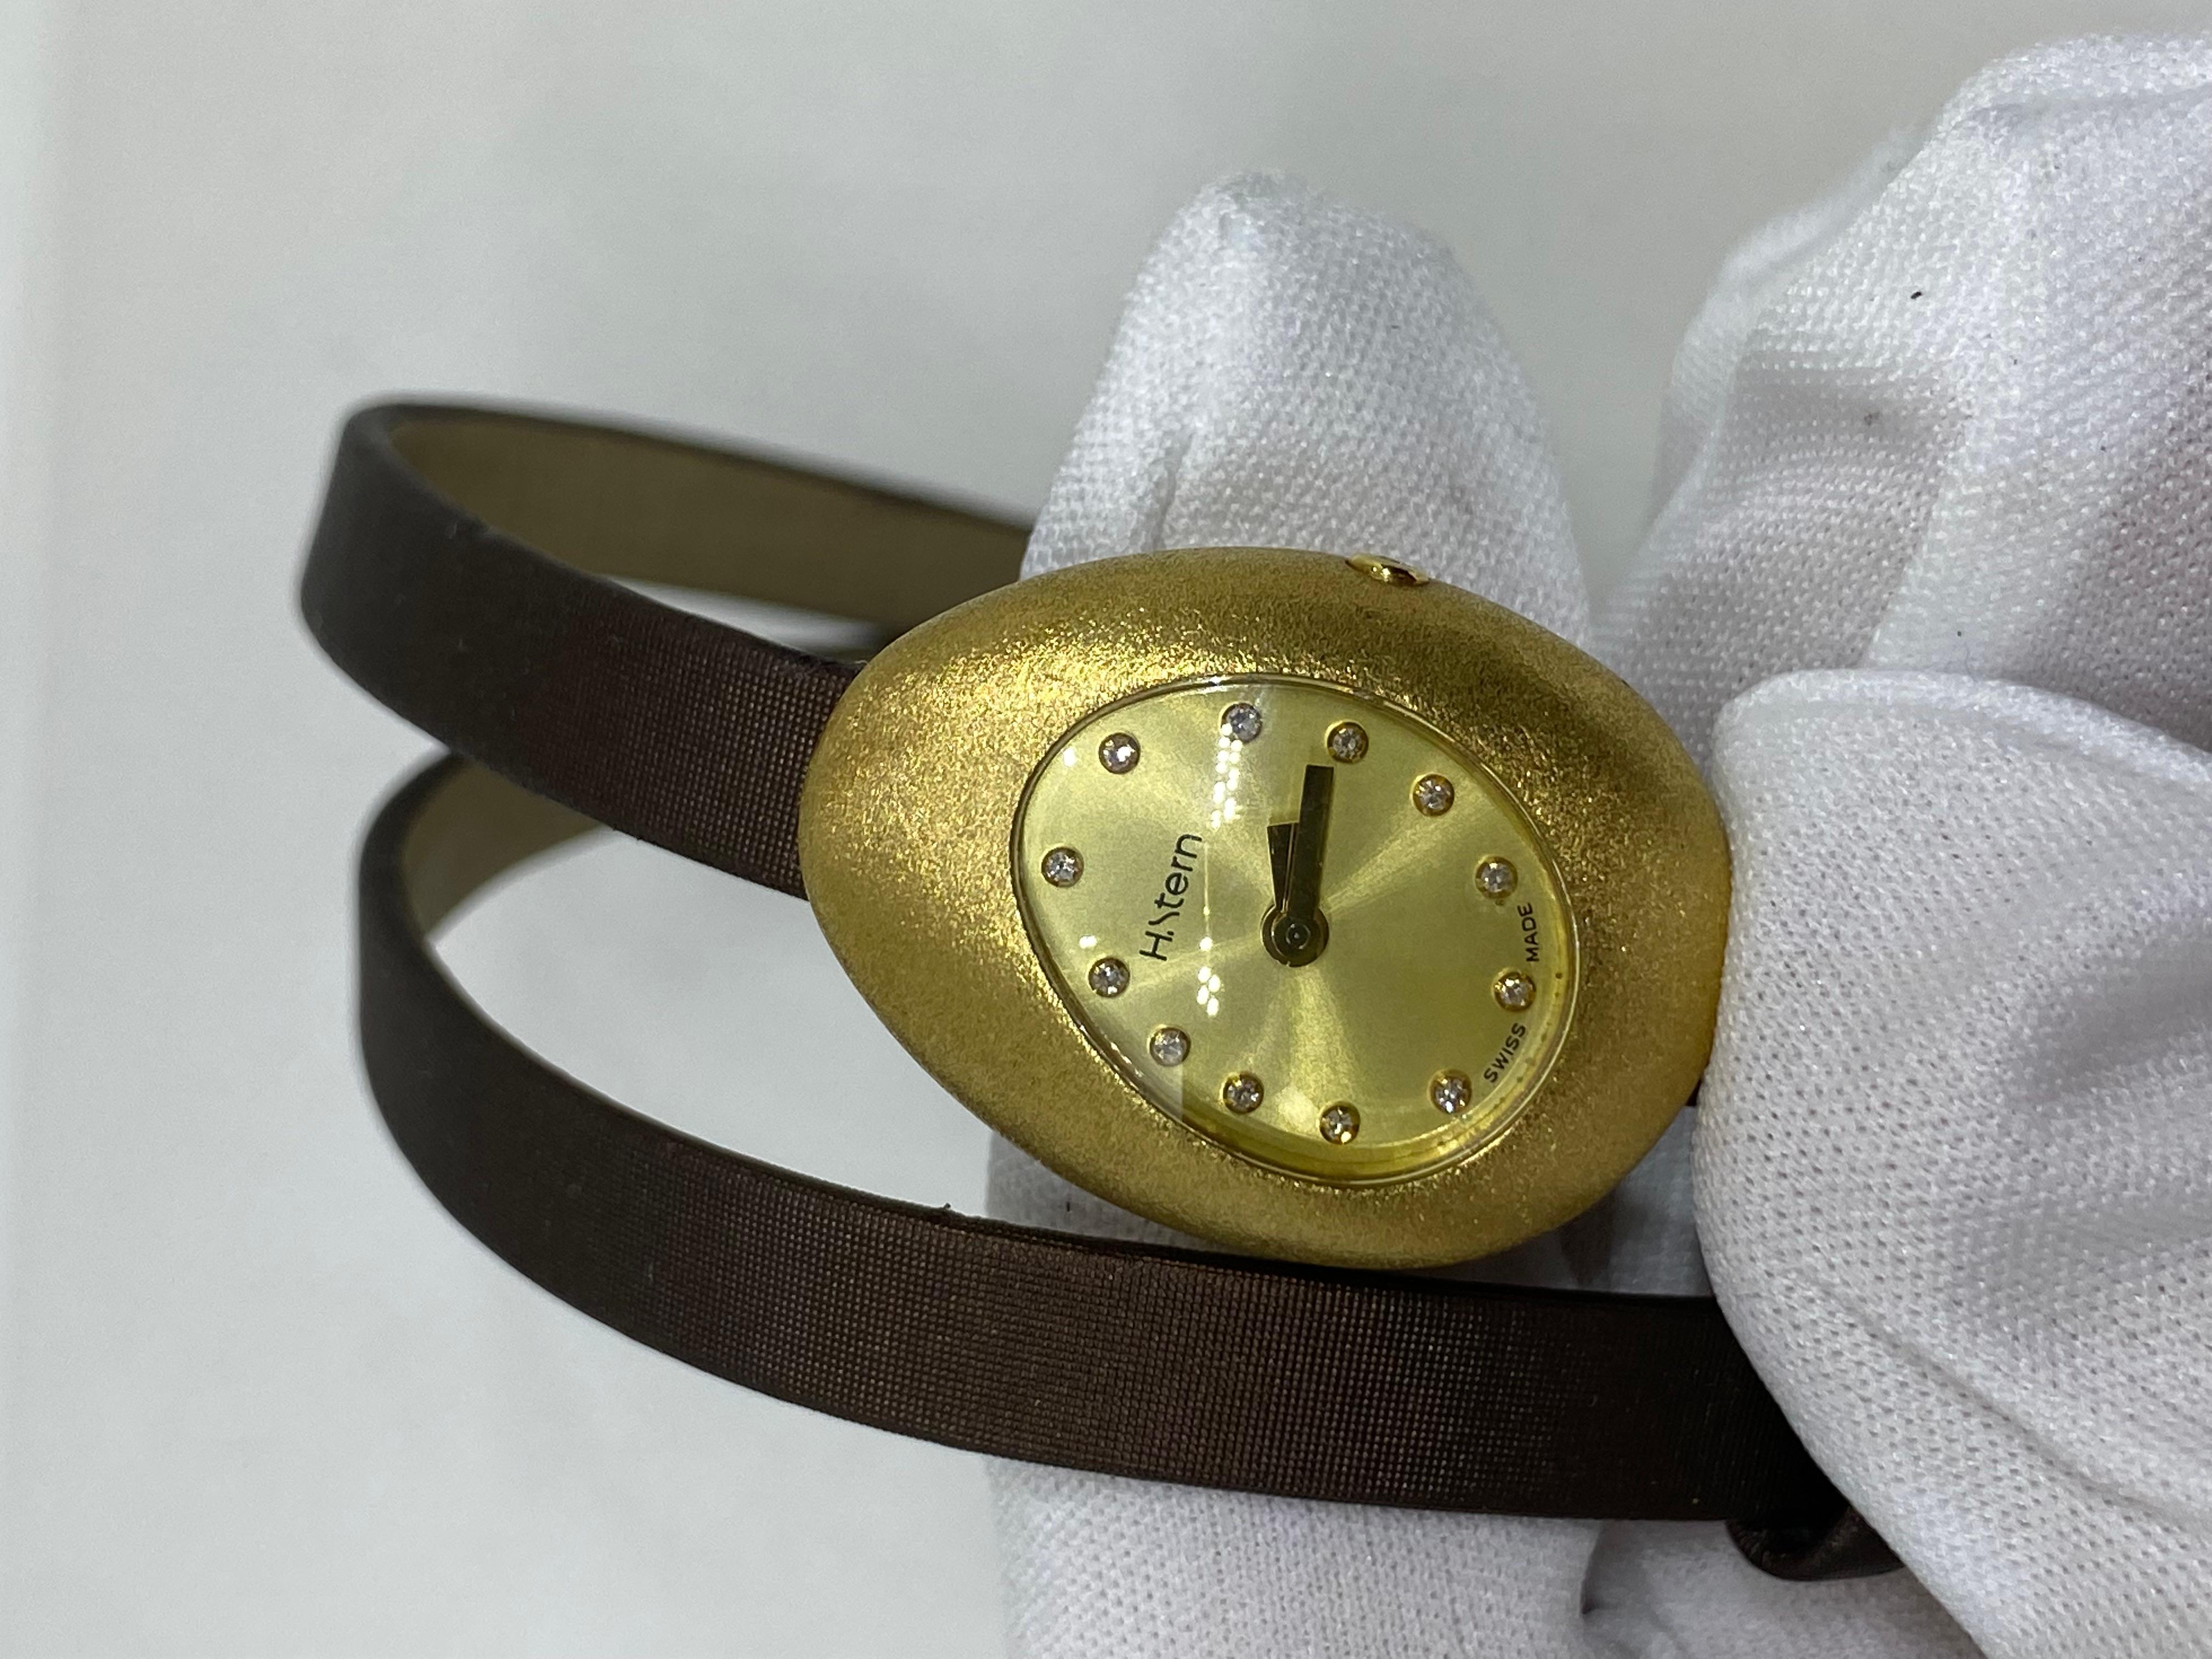 18K yellow gold 21mm x 29mm x 12mm. H. Stern Golden Stones watch featuring a quartz movement, brushed matte bezel, champagne dial and brown satin wrap strap with tang buckle. Swiss made. 3 ATM Waterproof.
